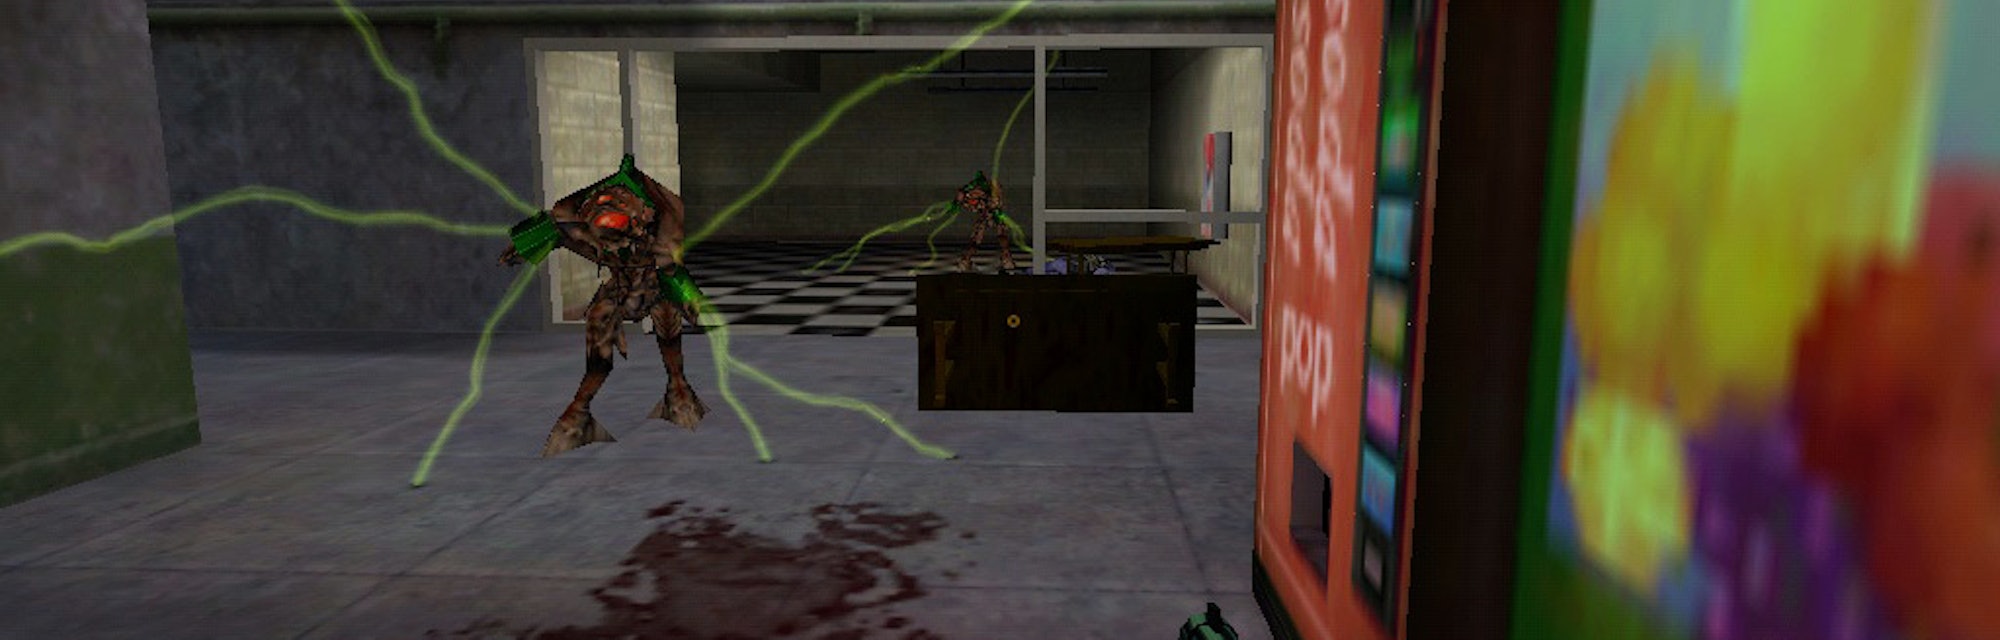 screenshot from 1998 game Half Life, showing monsters walking toward you with electric lightnining e...